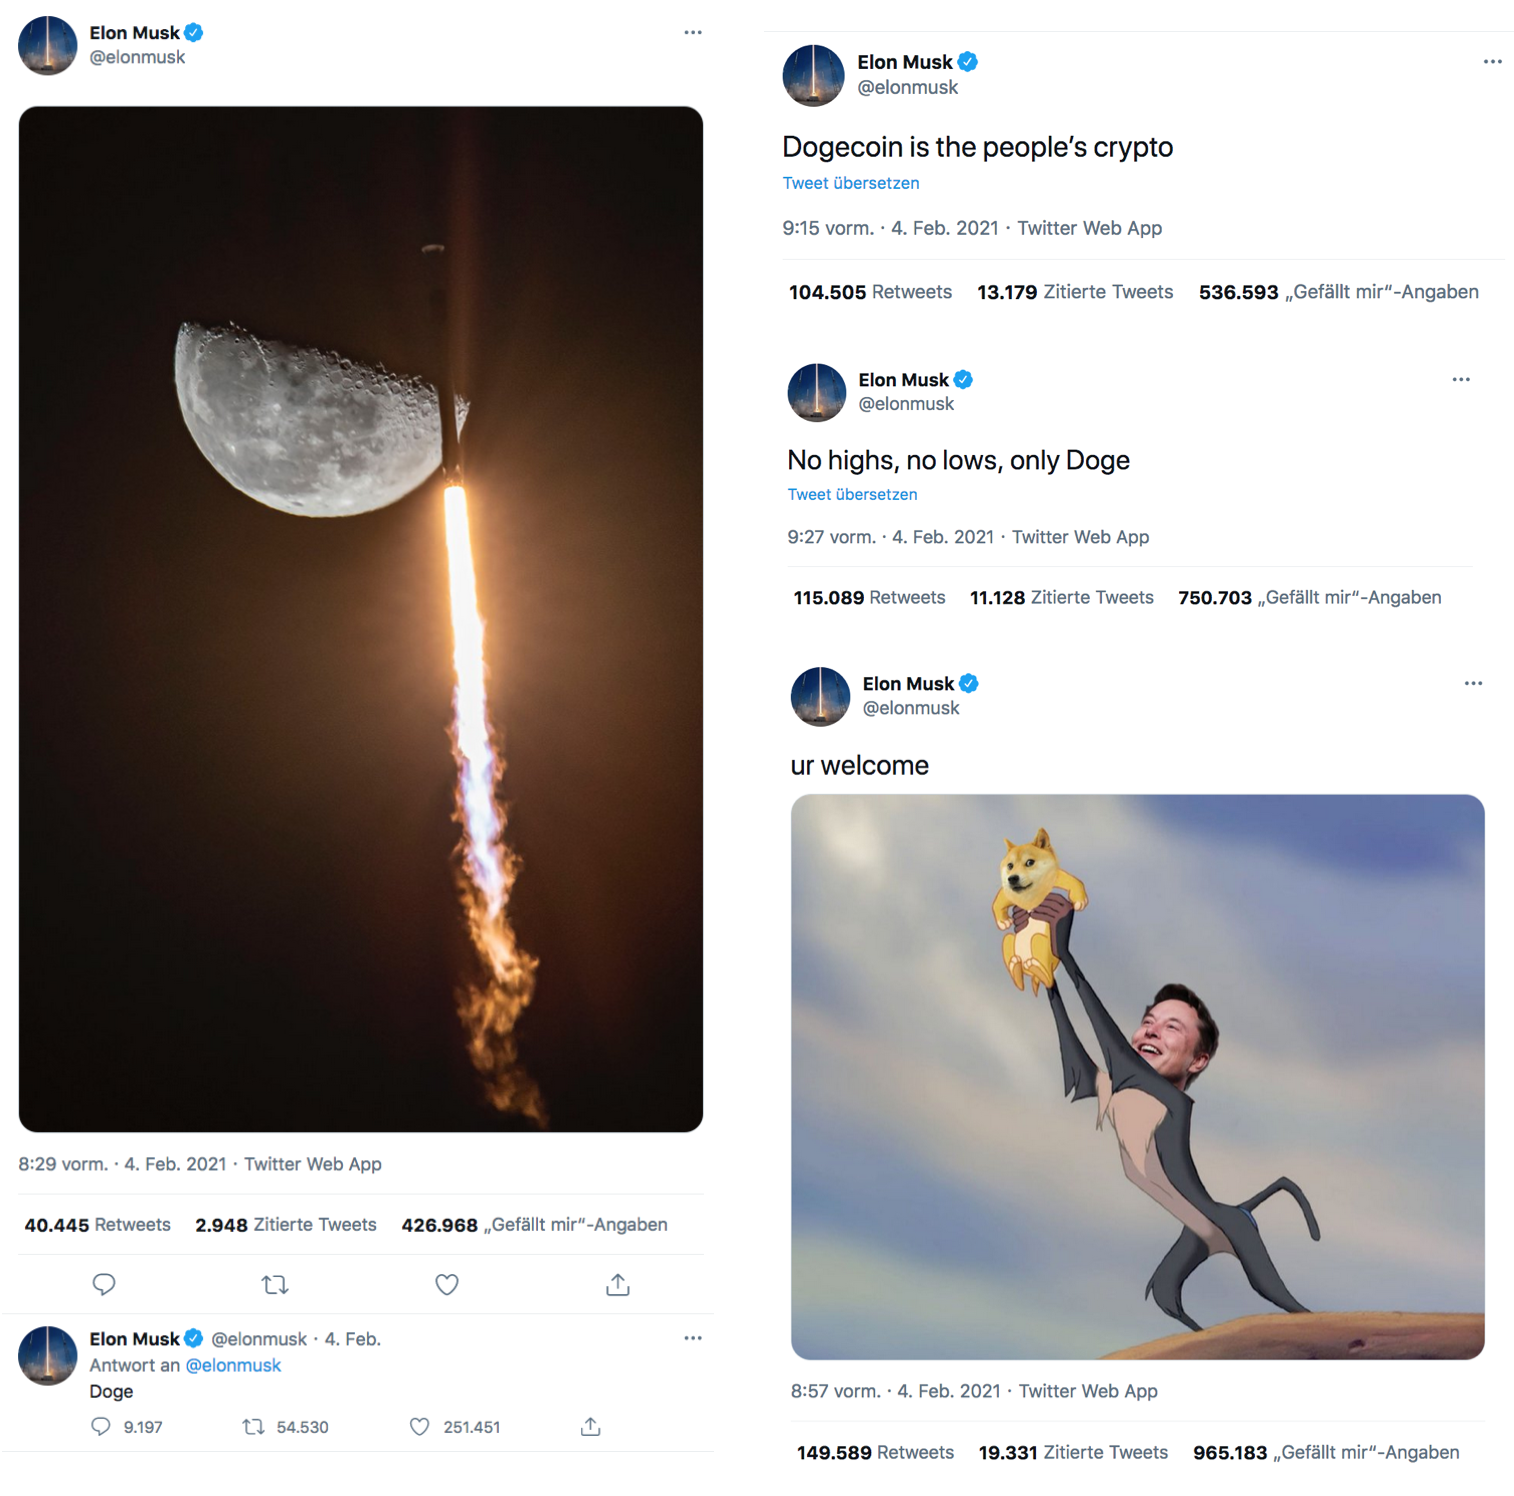 DOGE Drops After Elon Musk's Twitter Stops Using Its Dog Logo